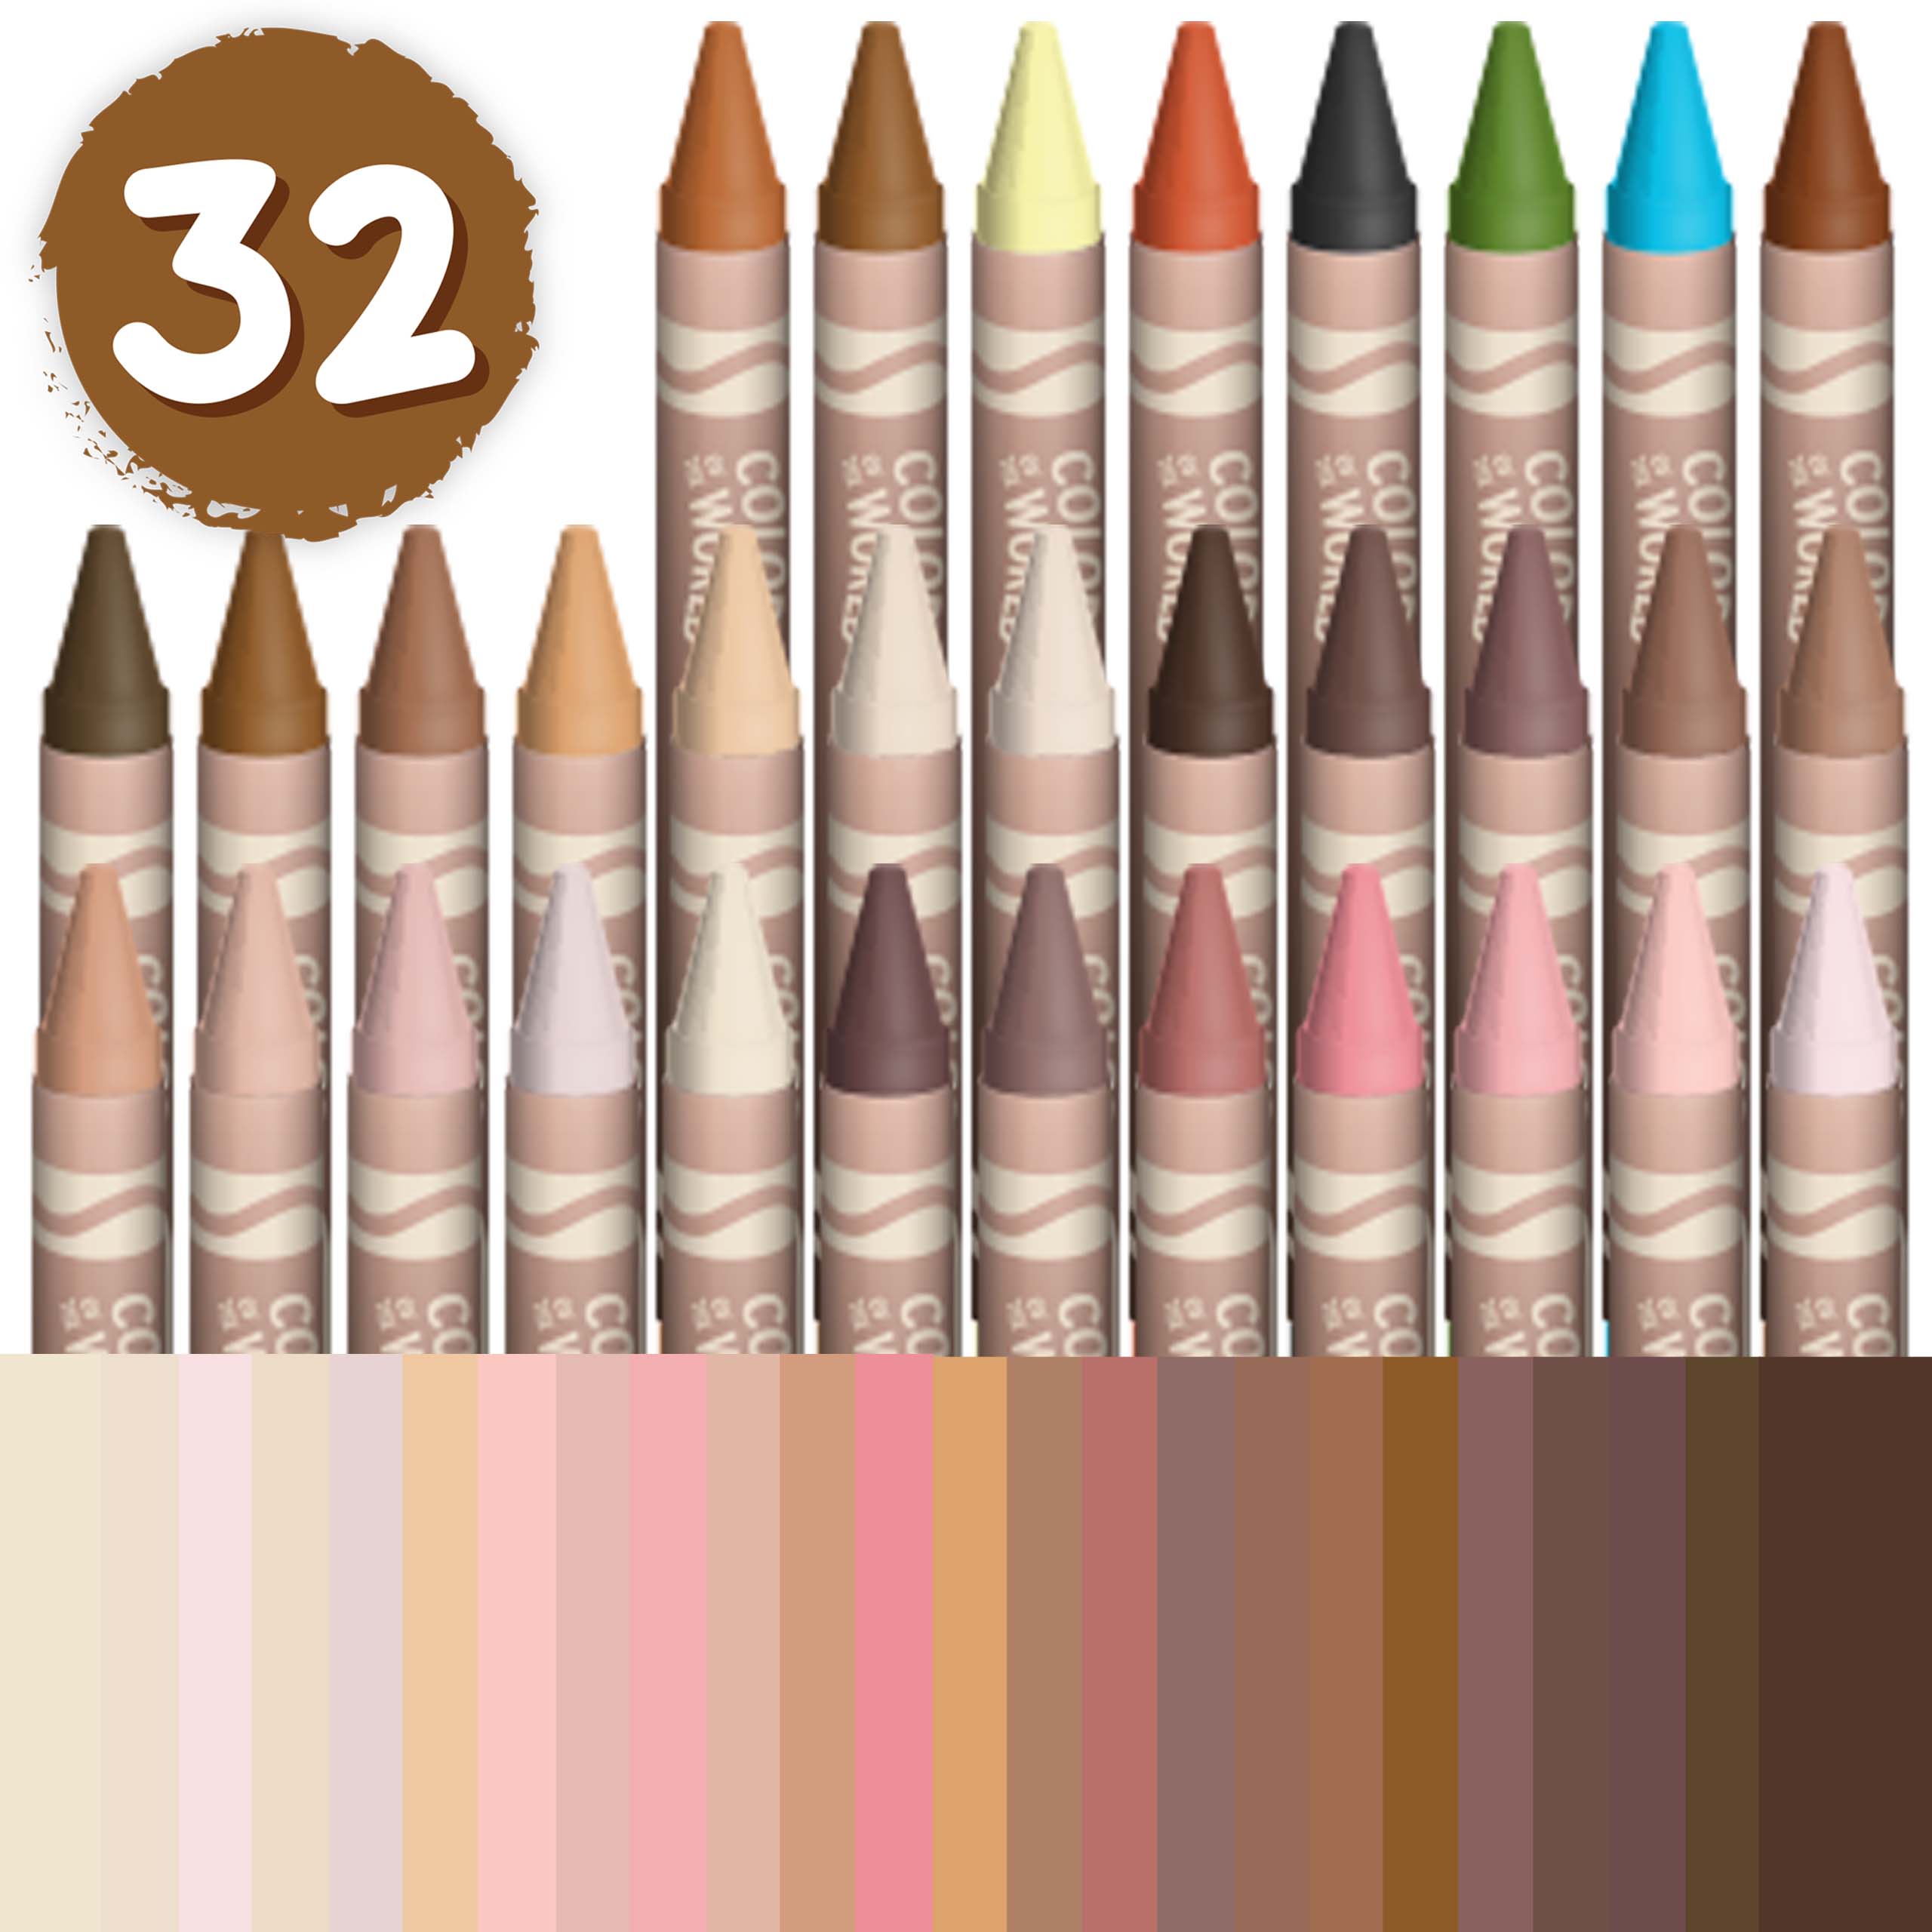 Crayola Colors of the World Skin Tone Crayons, 32 Ct, Back to School Supplies, Unisex Child - image 2 of 6